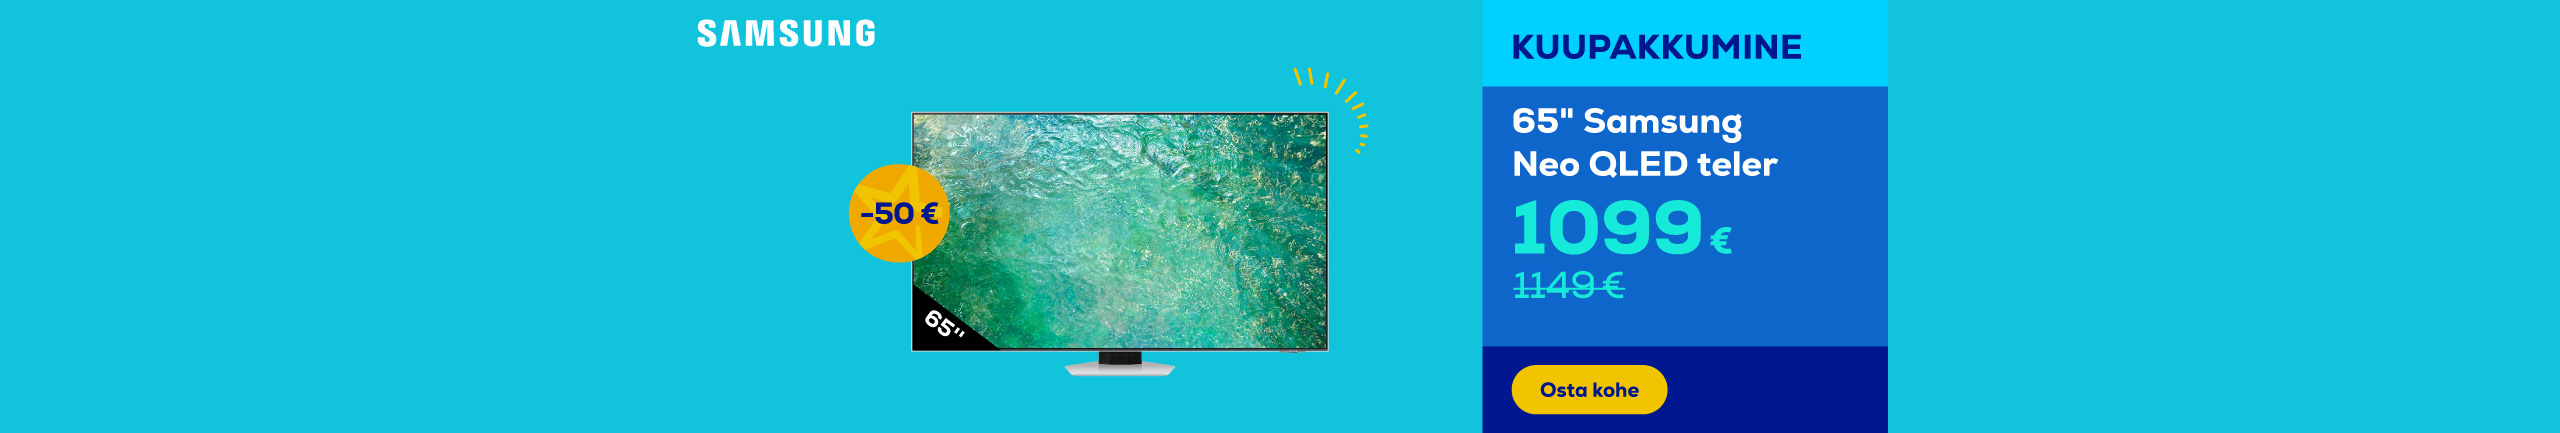 Samsung TVs for good prices!